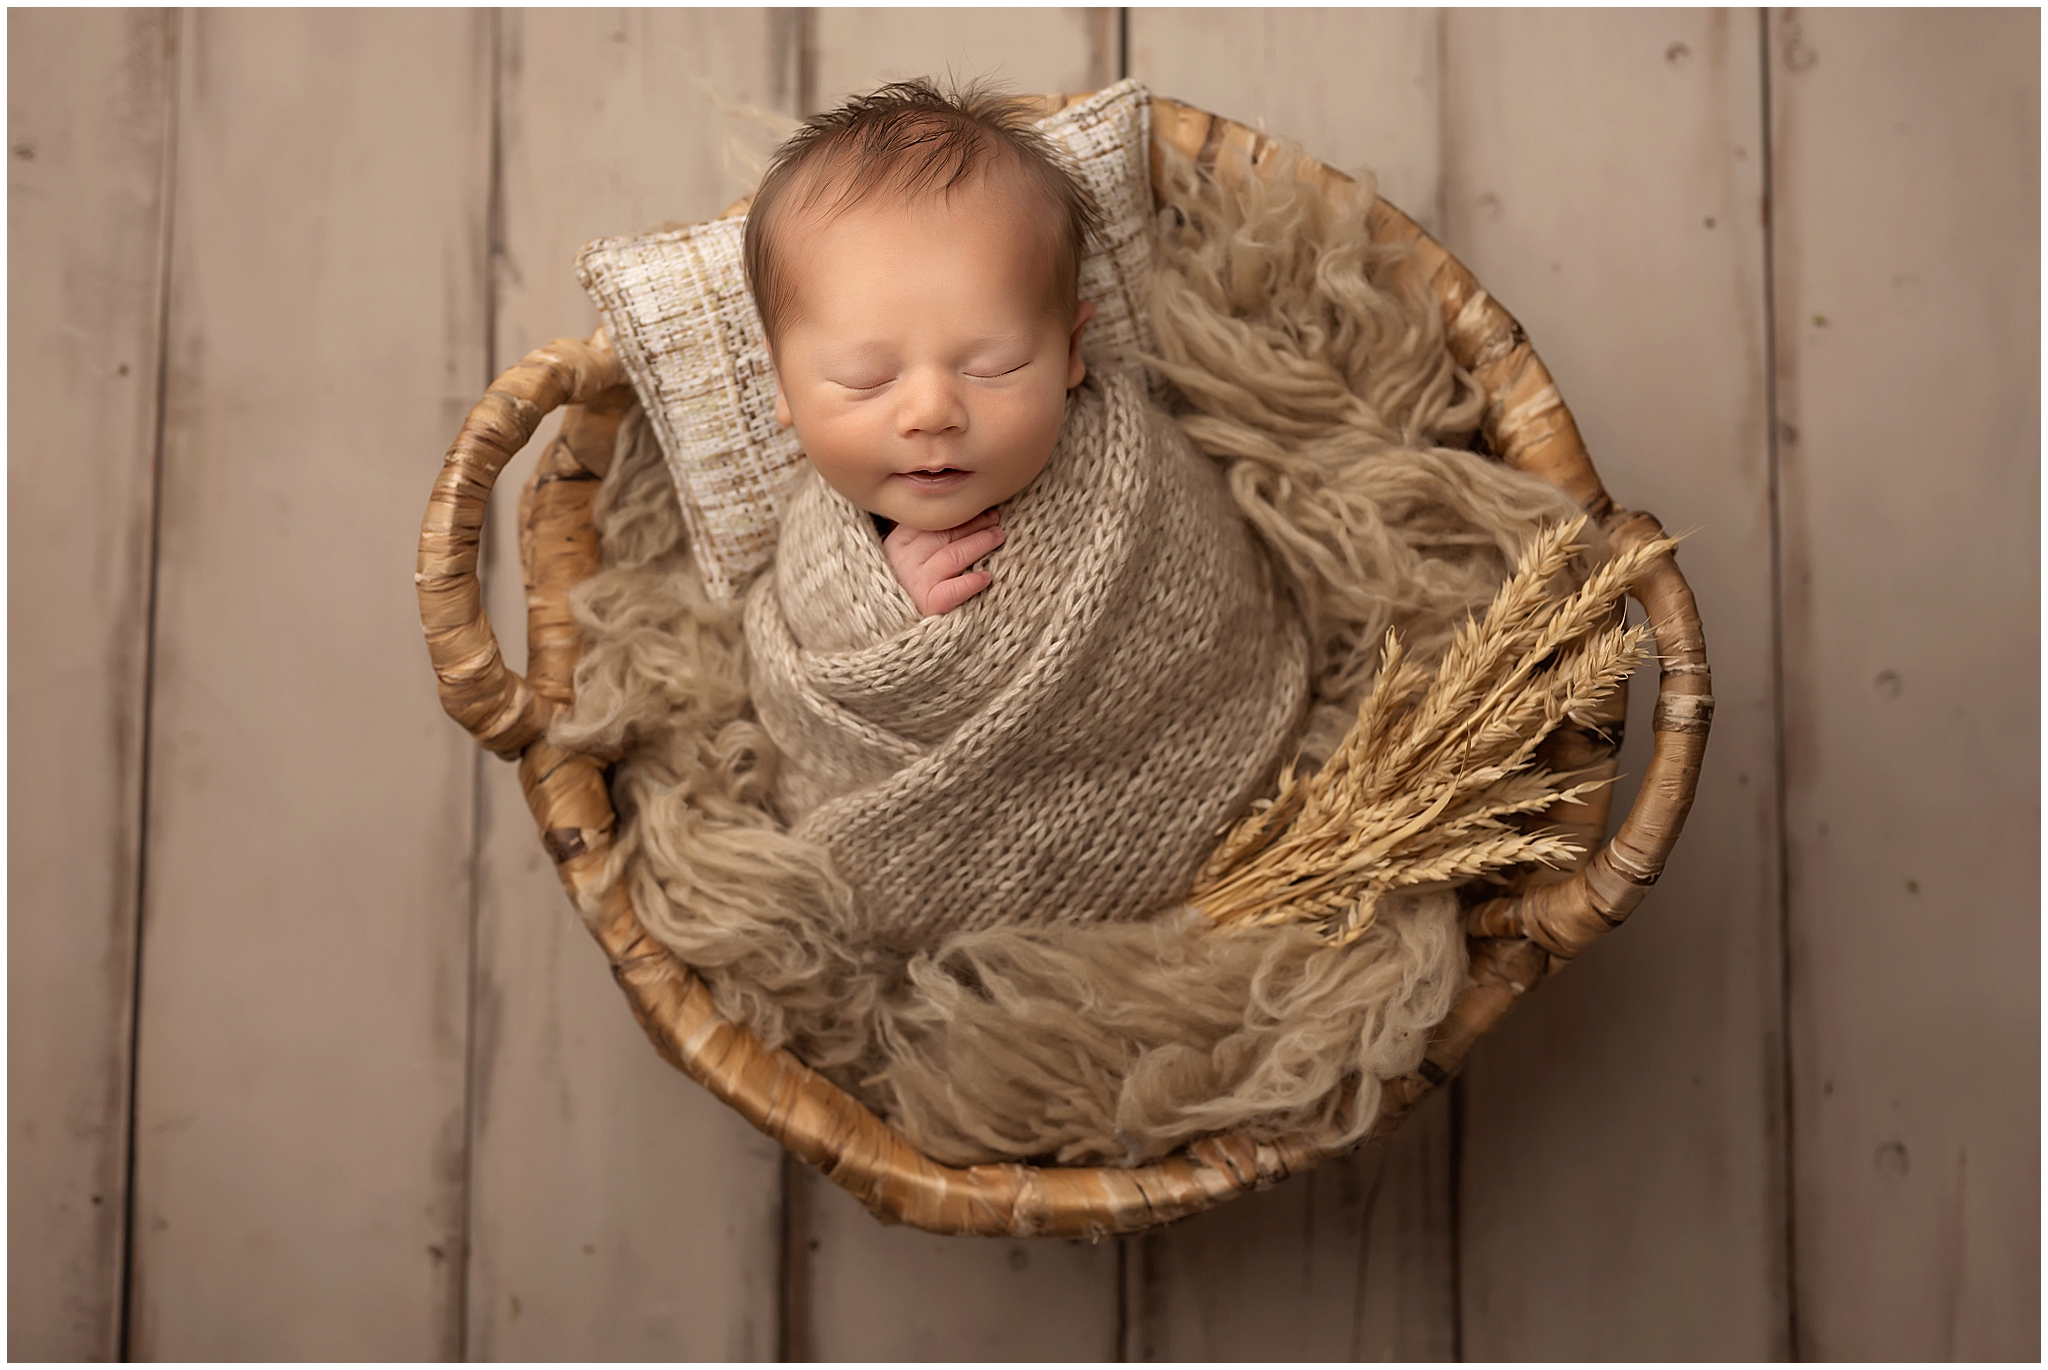 newborn baby boy wrapped and sleeping in basket during newborn photography session in London Ontario studio